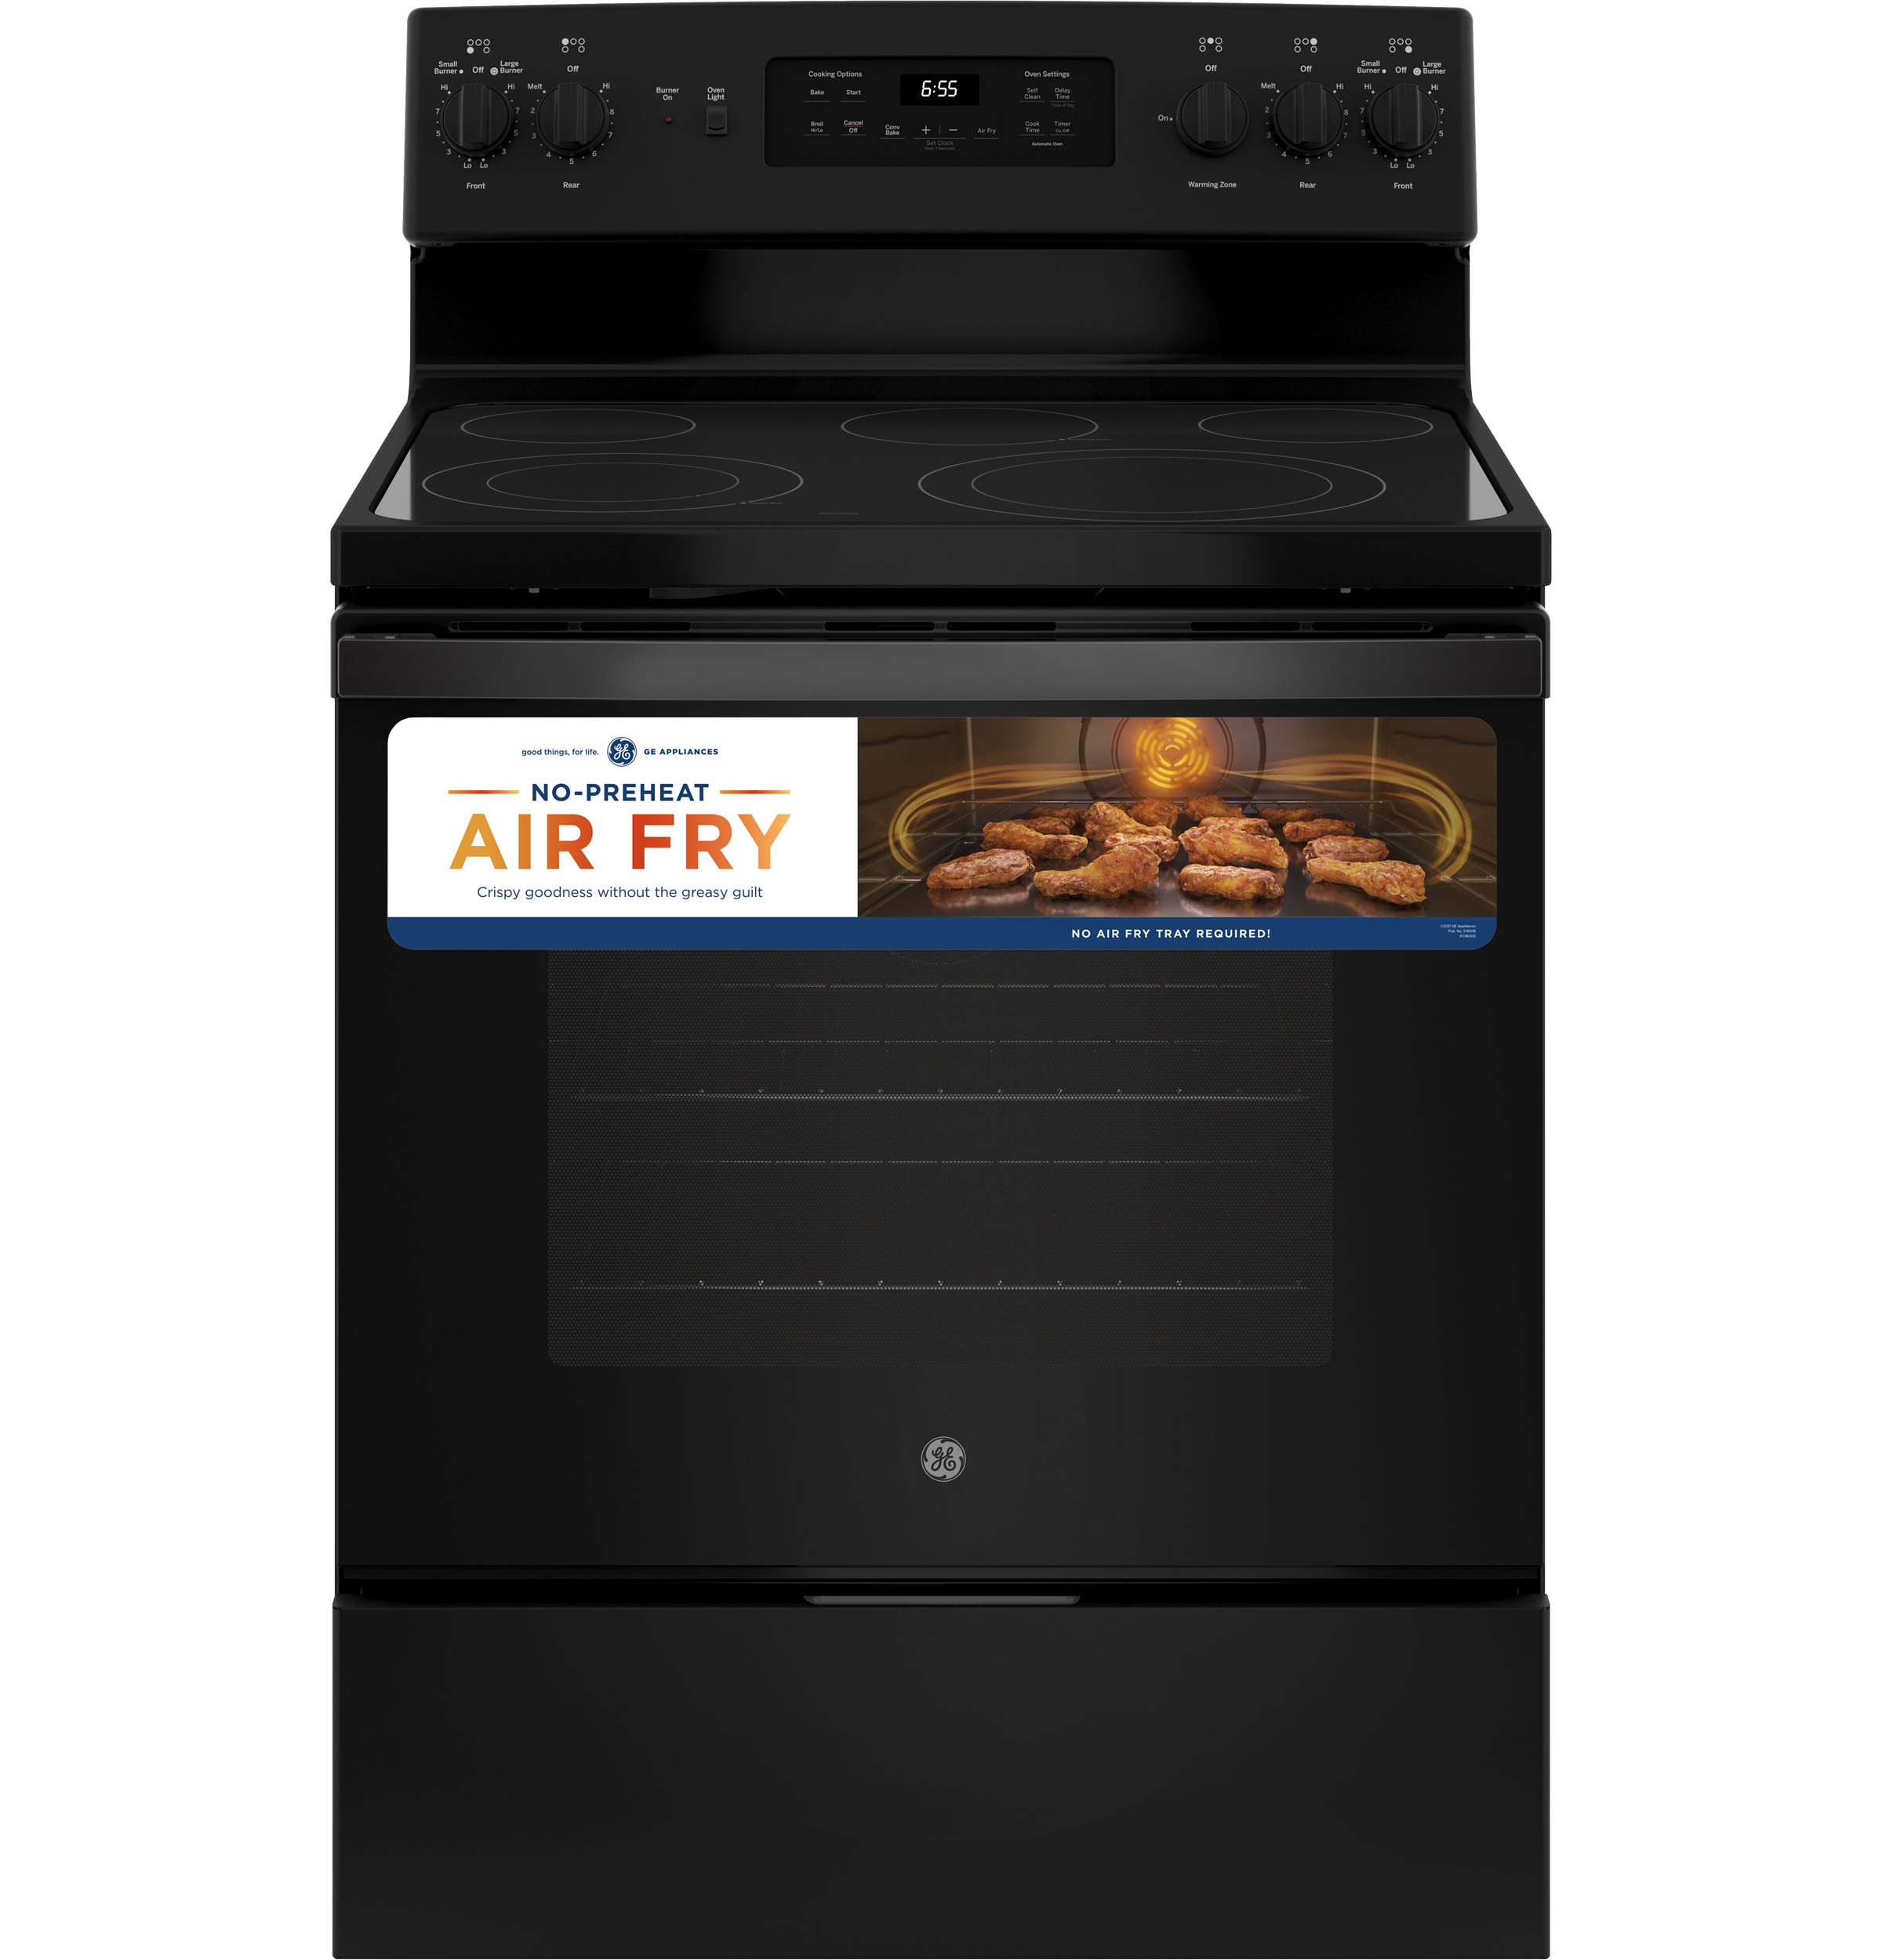 Eco-Touch 5-Pan Convection Oven – All Bake Technologies